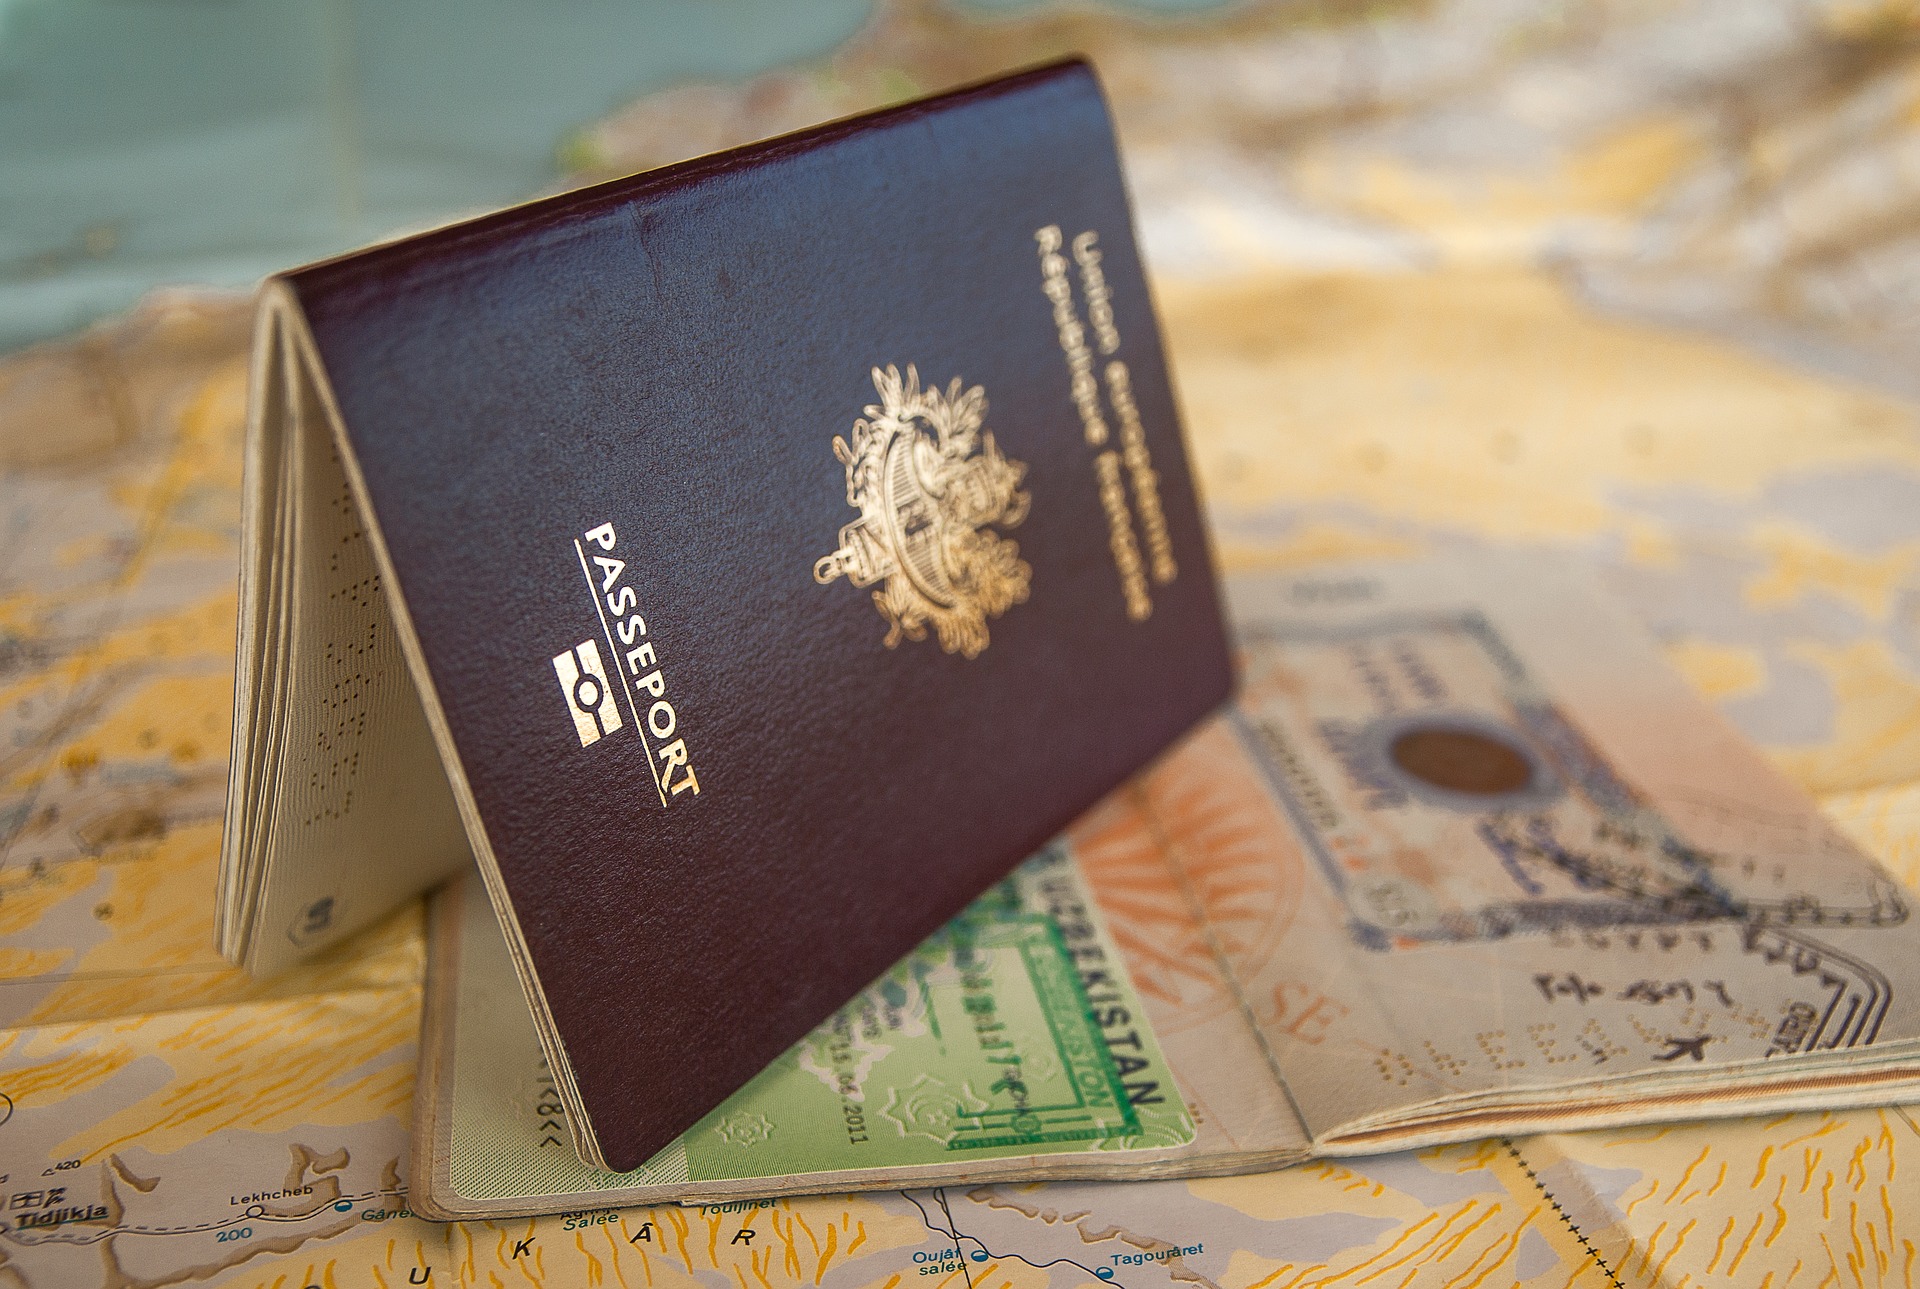 Is the photo requirement for passports and visas the same?